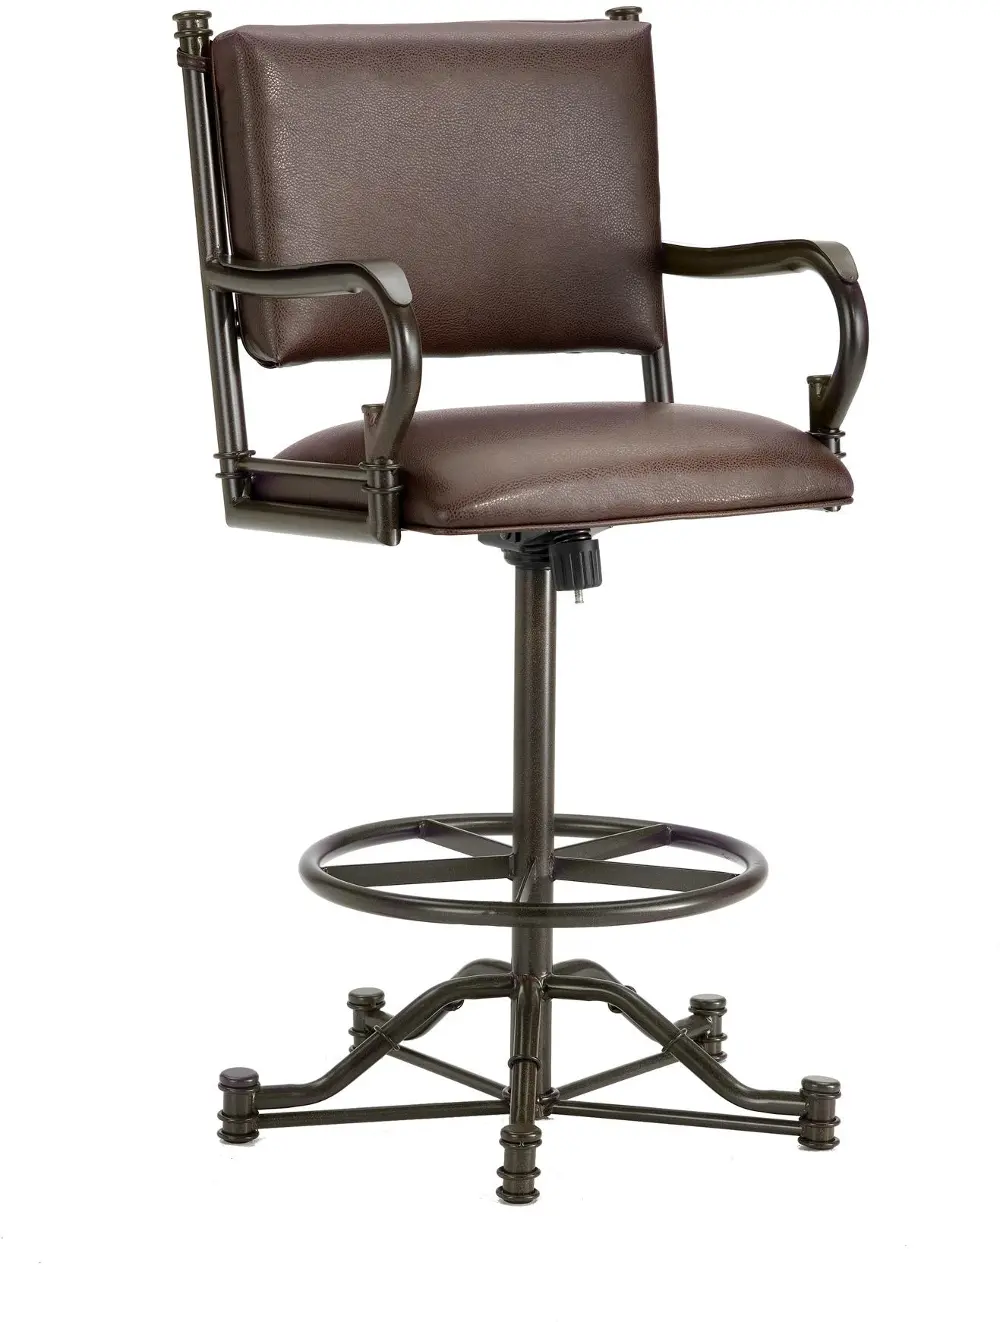 Brown and Rust 30 Inch Swivel Bar Stool - Baltimore-1